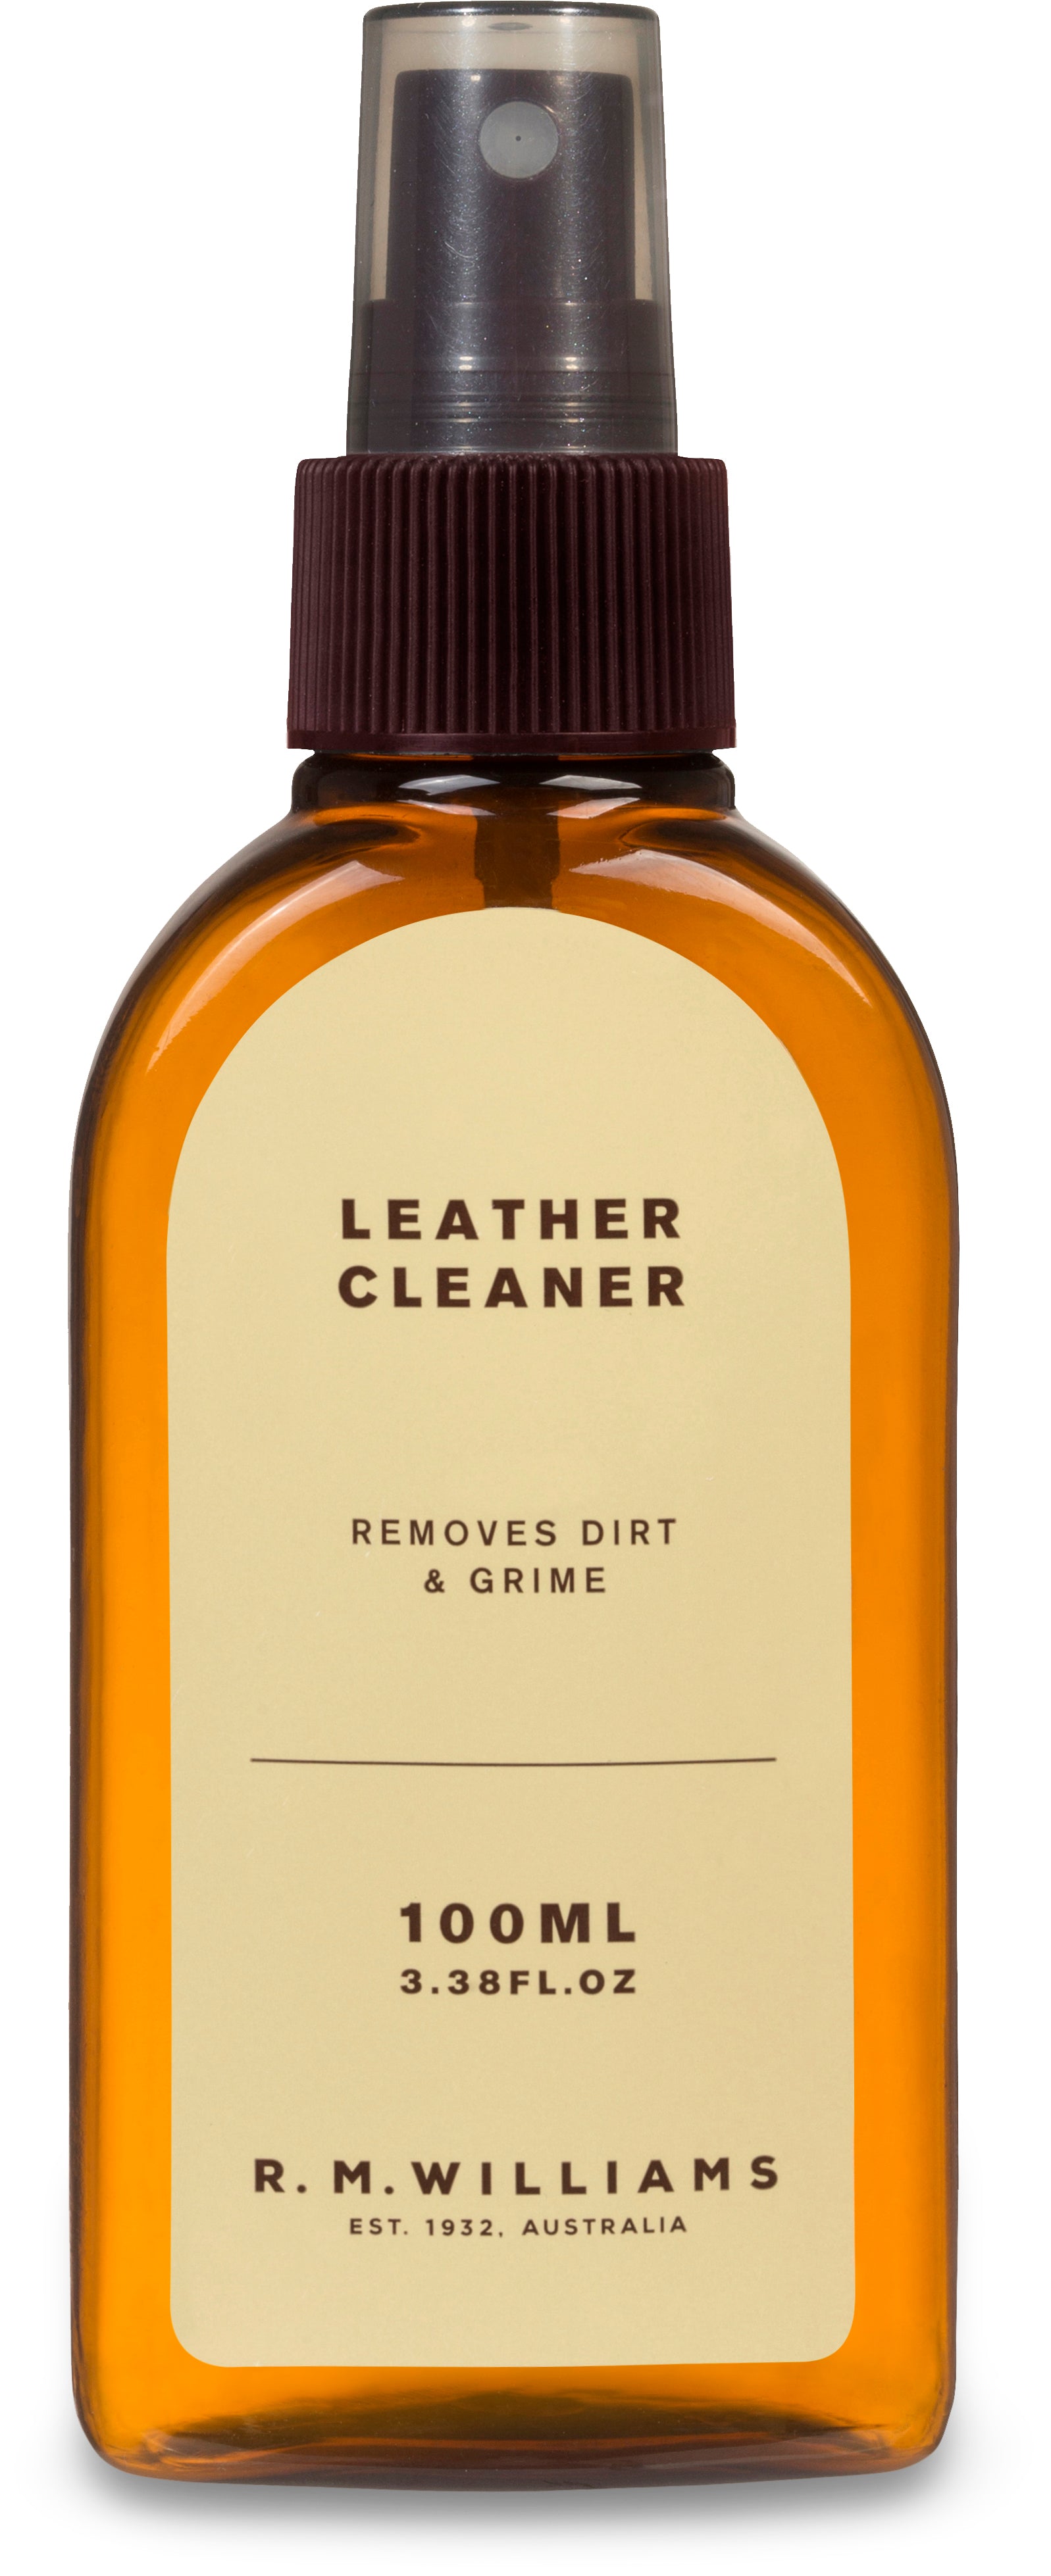 Leather cleaner Boot Cleaner R.M. WILLIAMS